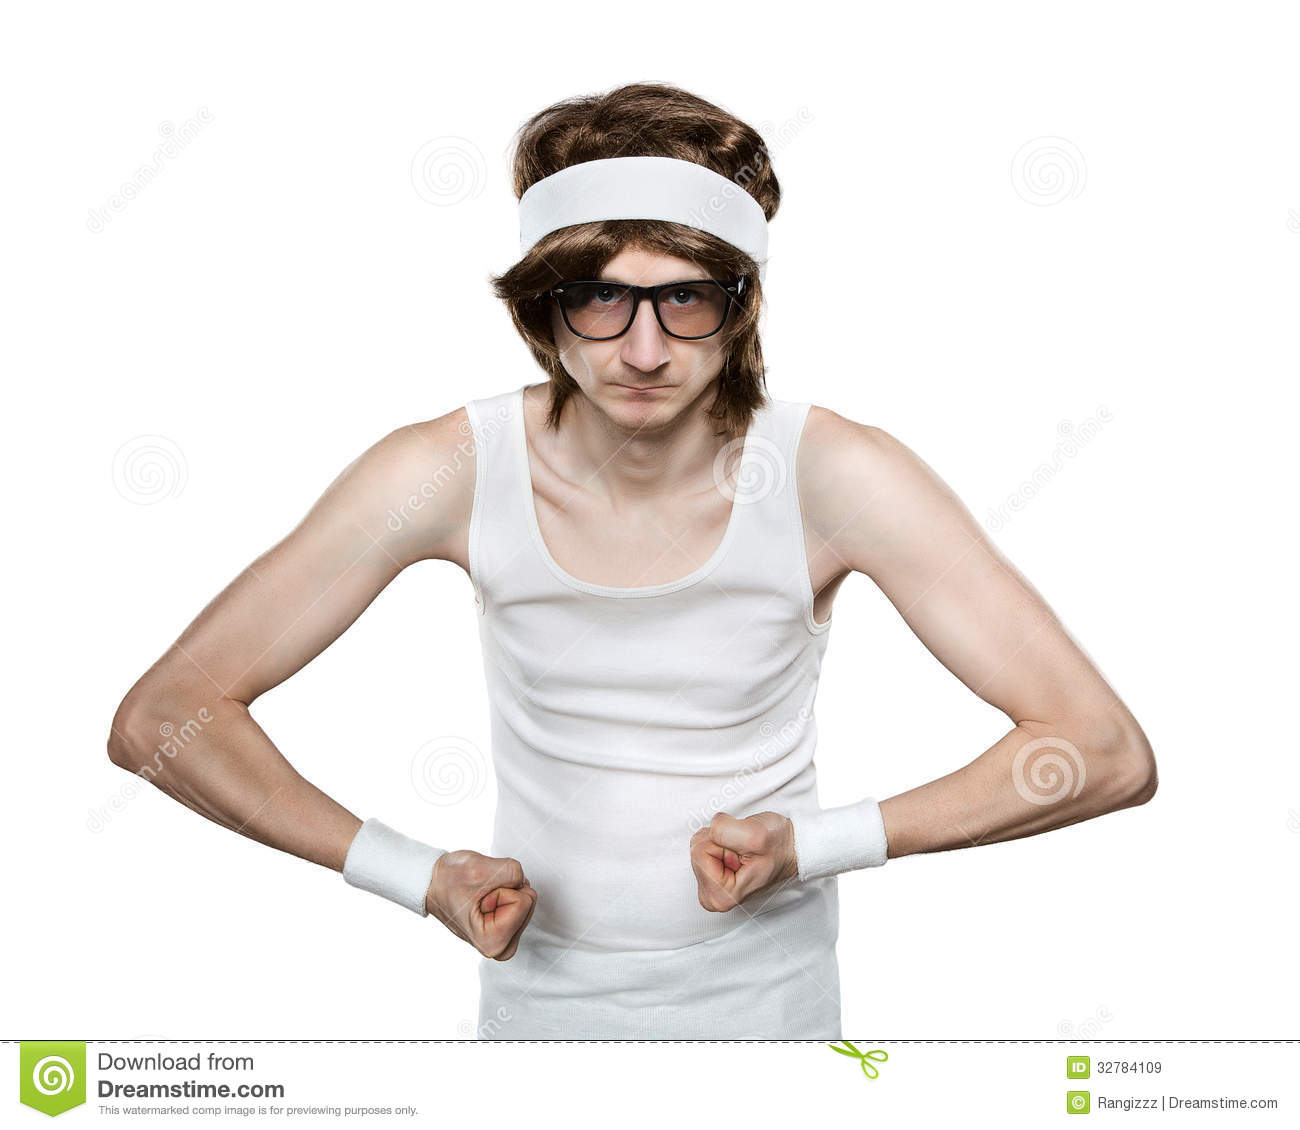 Funny Retro Sports Nerd Royalty Free Stock Images   Image  32784109